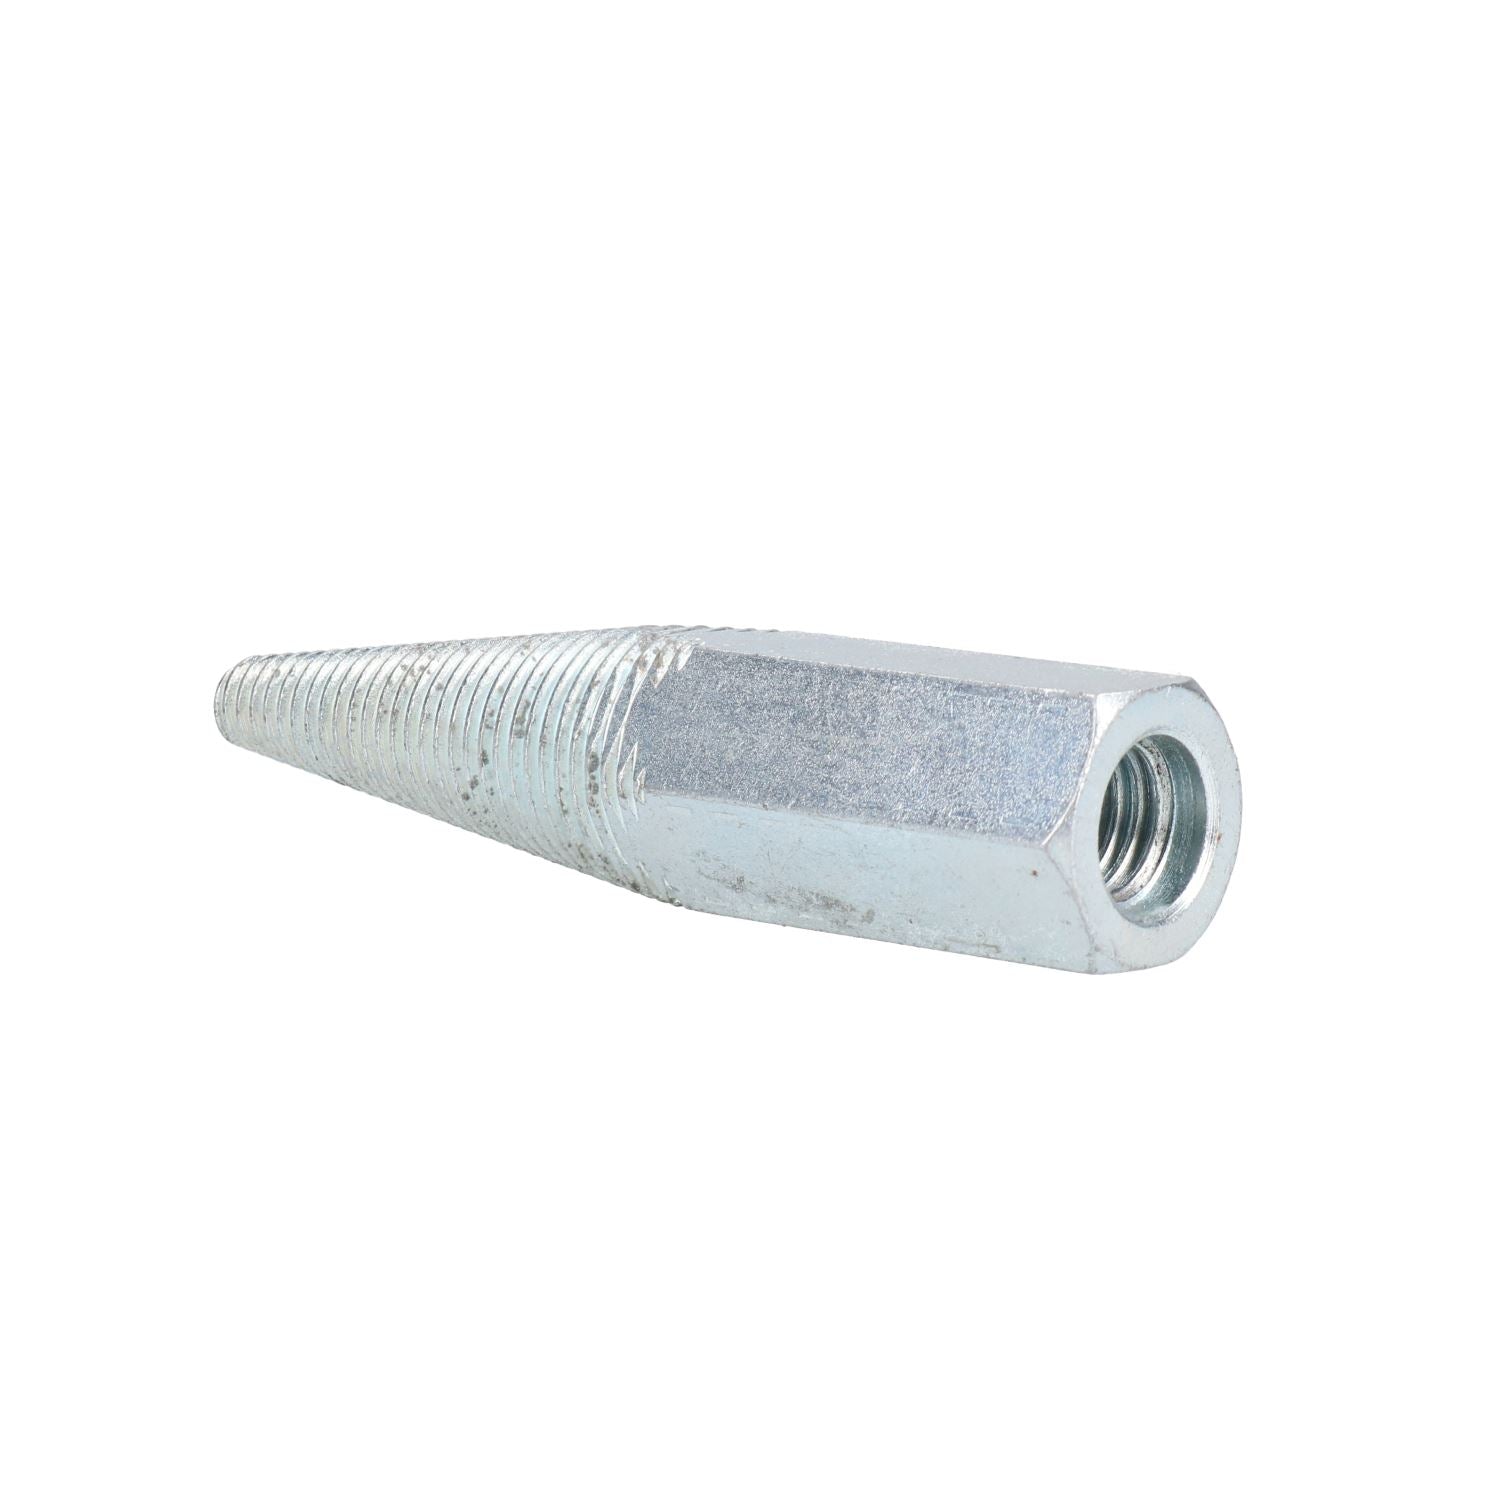 Tapered Polishing Spindle for Angle Grinder 4-1/2" & 9" M14 Thread